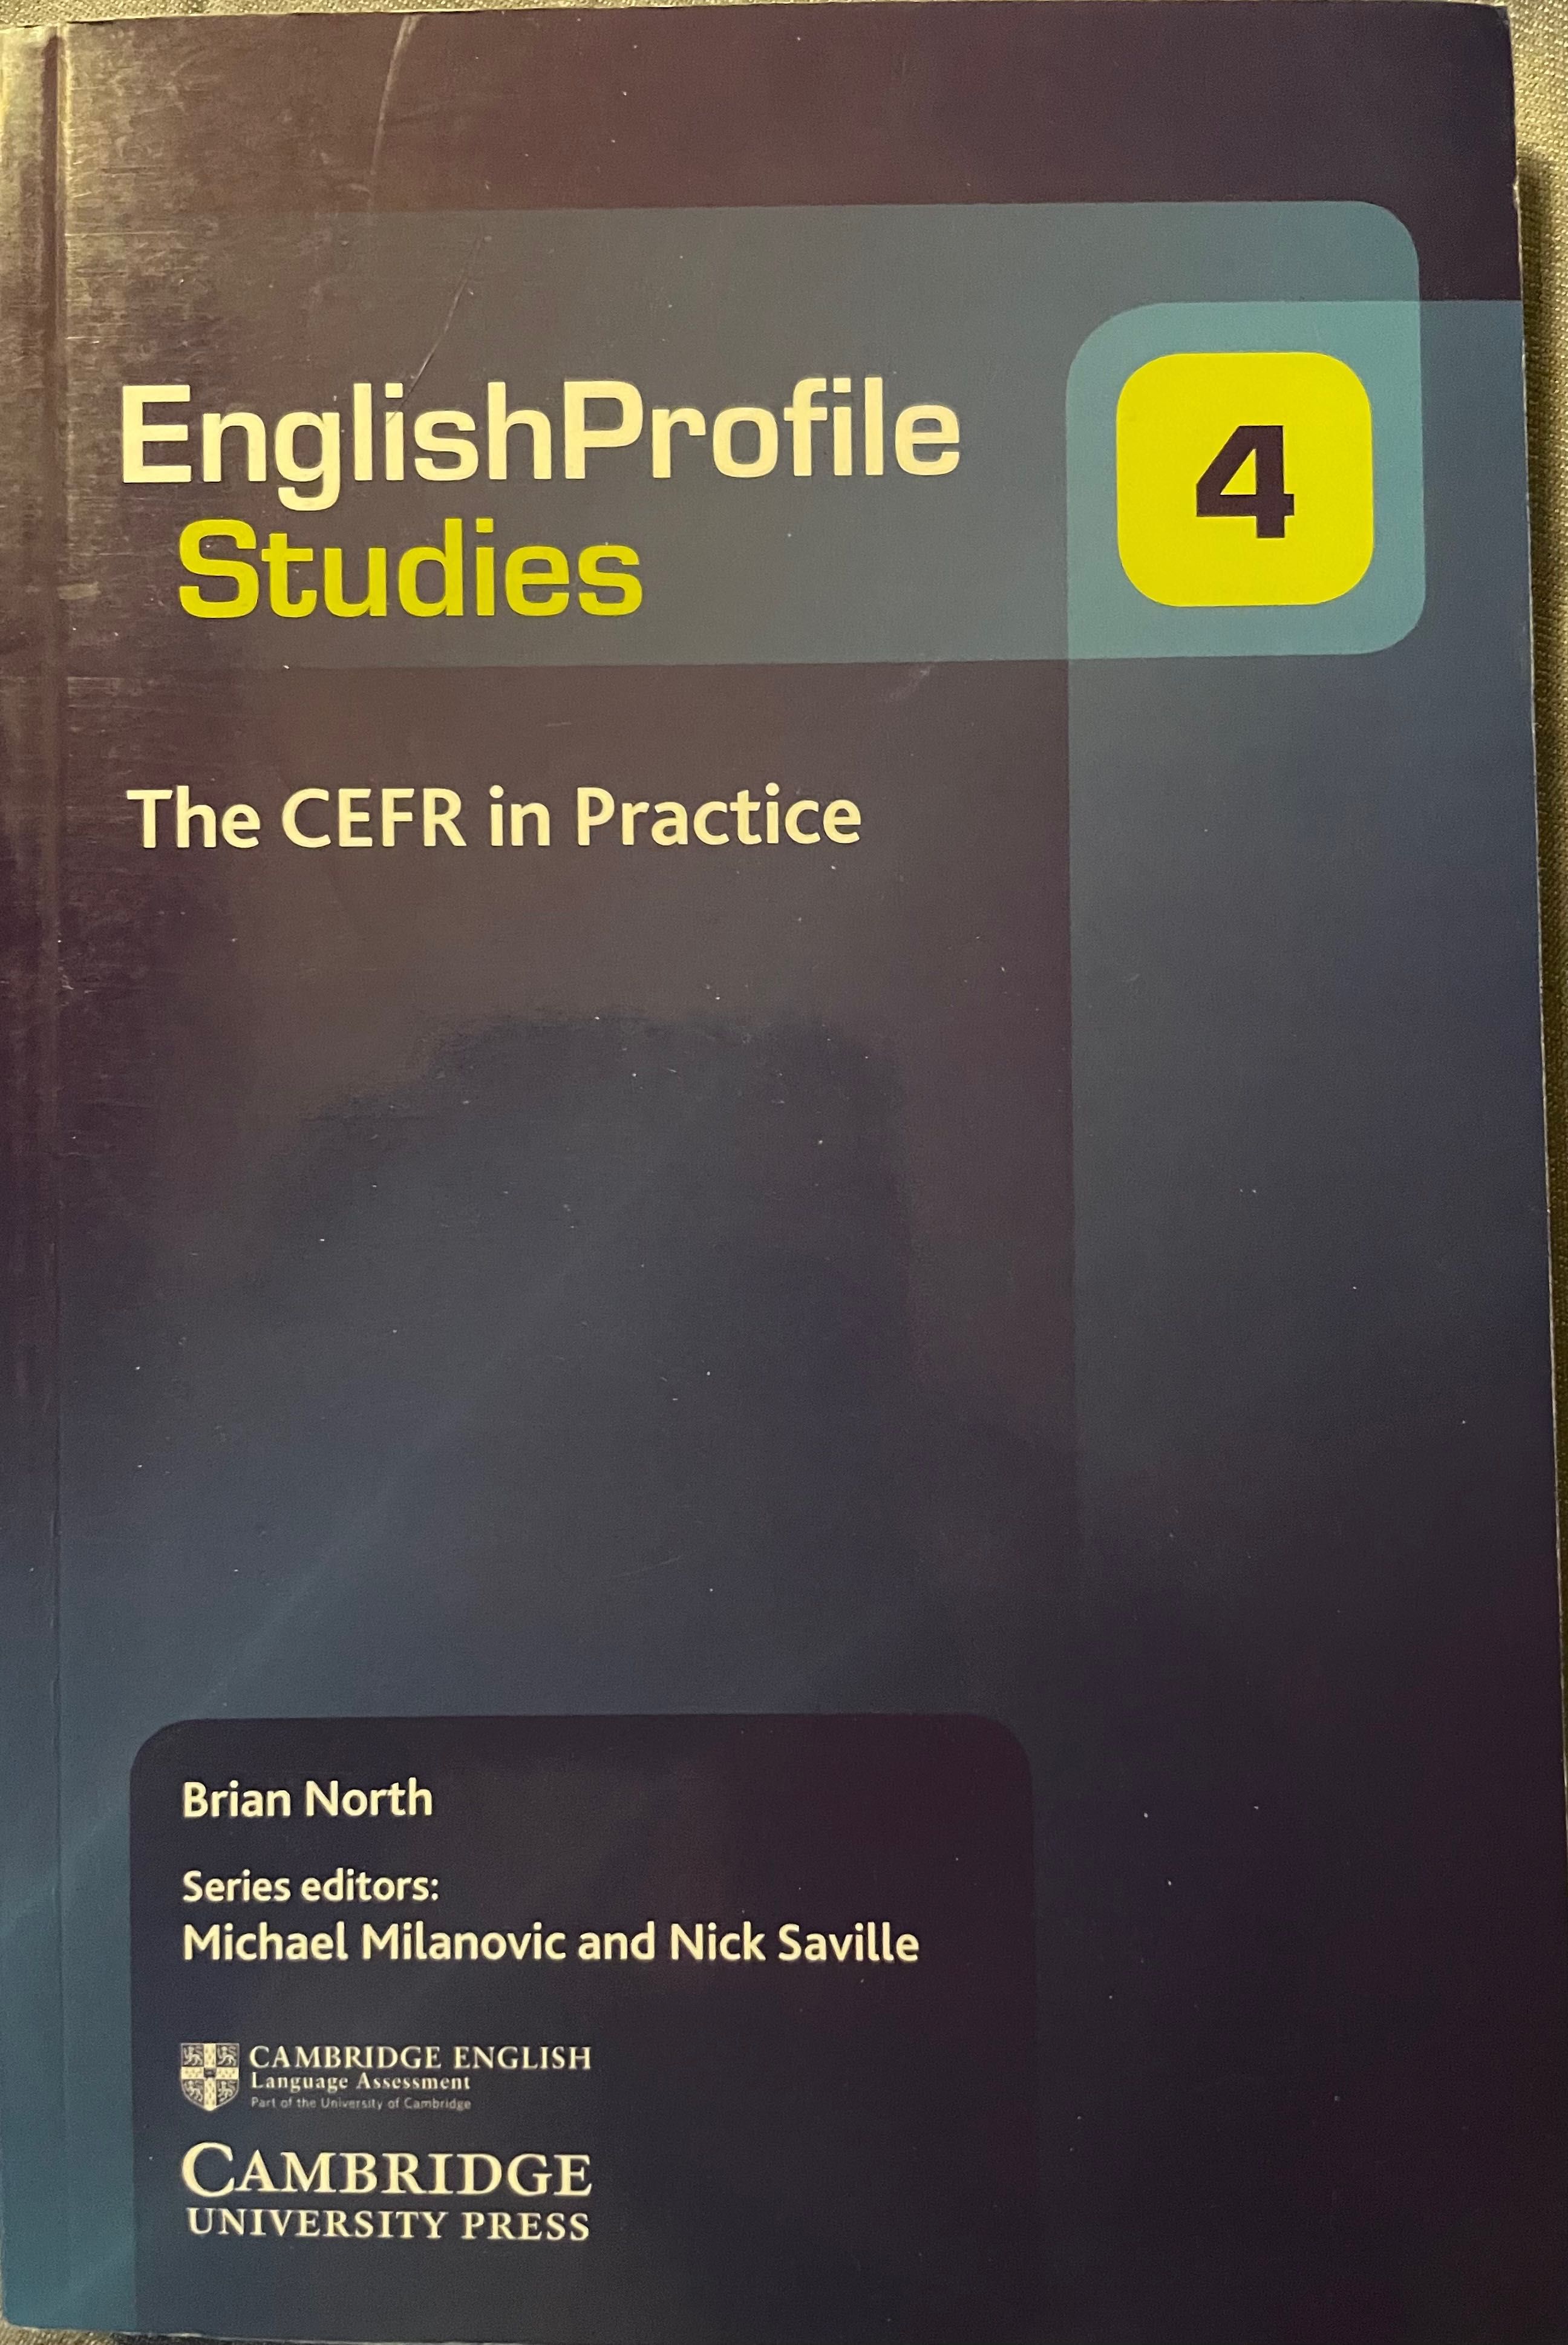 The CEFR in Practice (English Profile Studies, Series Number 4)